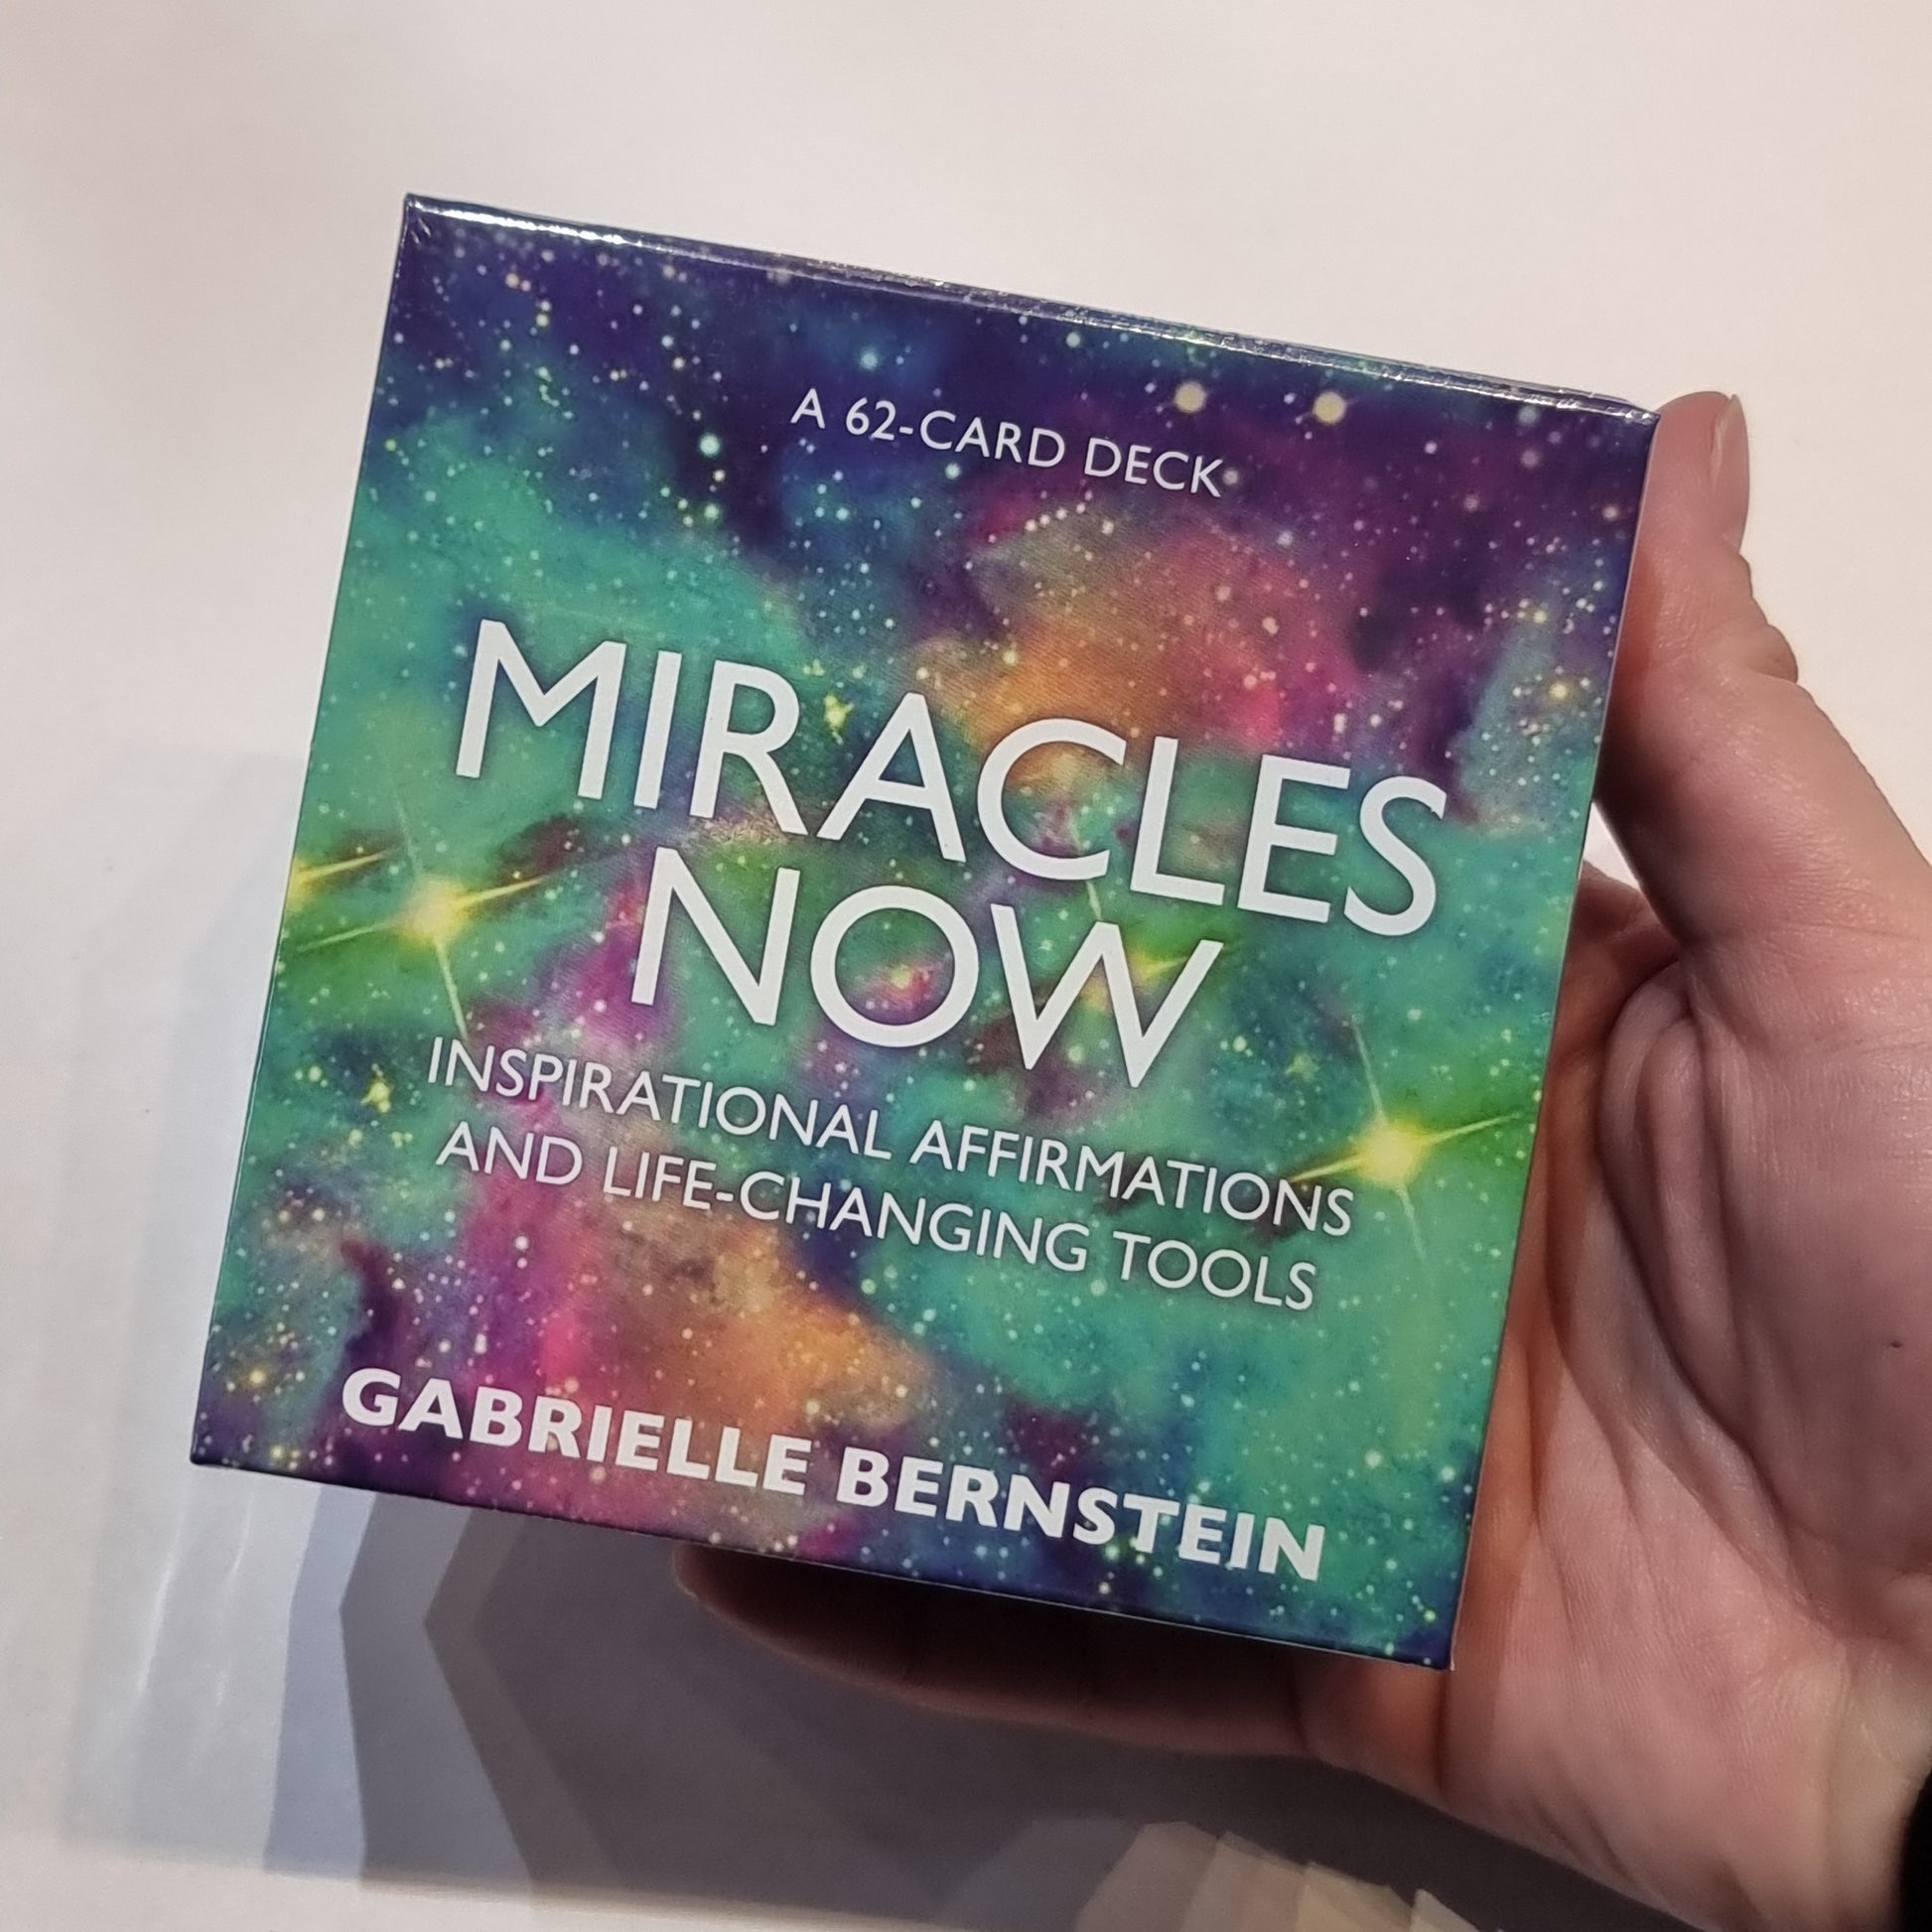 Miracles now cards - Rivendell Shop